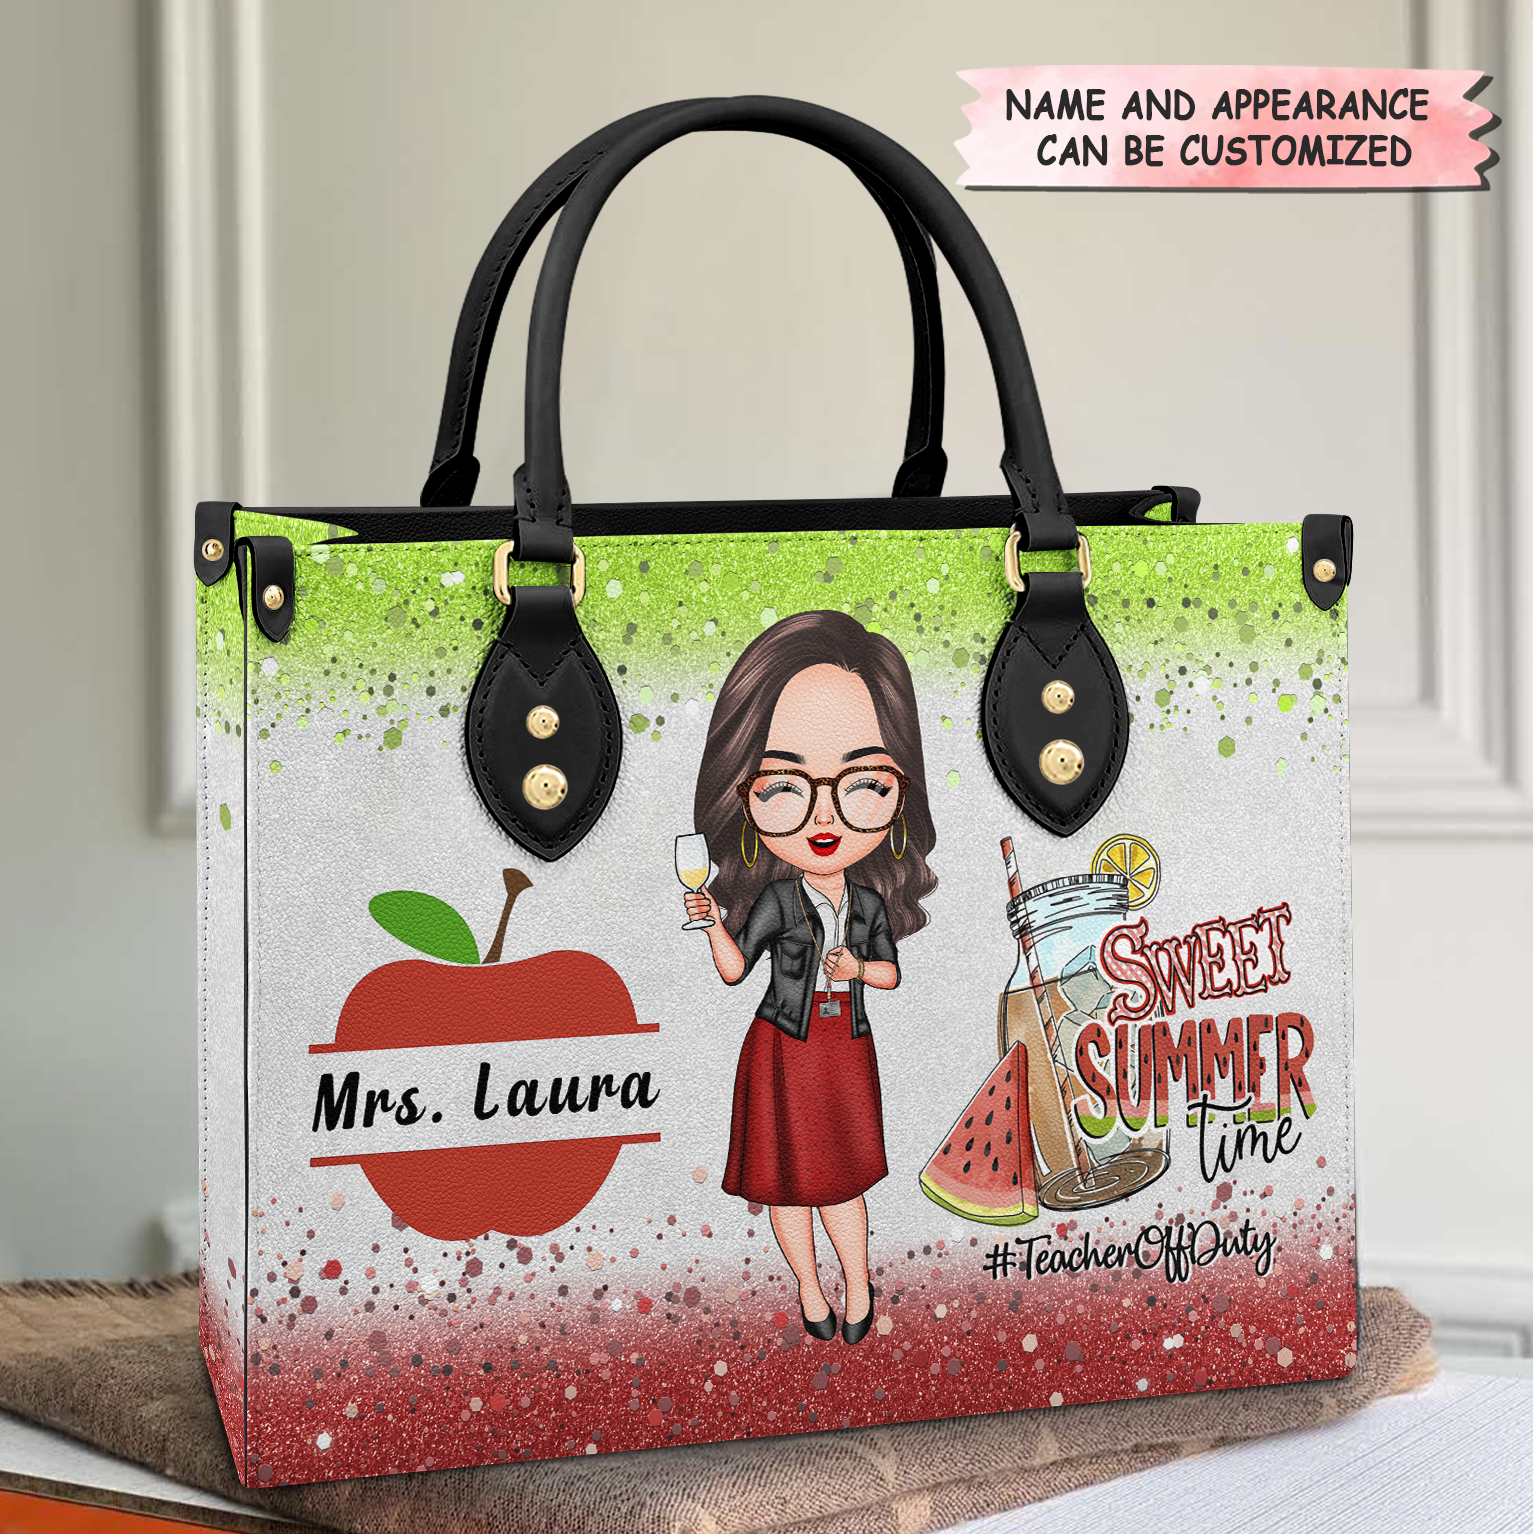 Personalized Leather Bag - Gift For Teachers - Sweet Summer Time